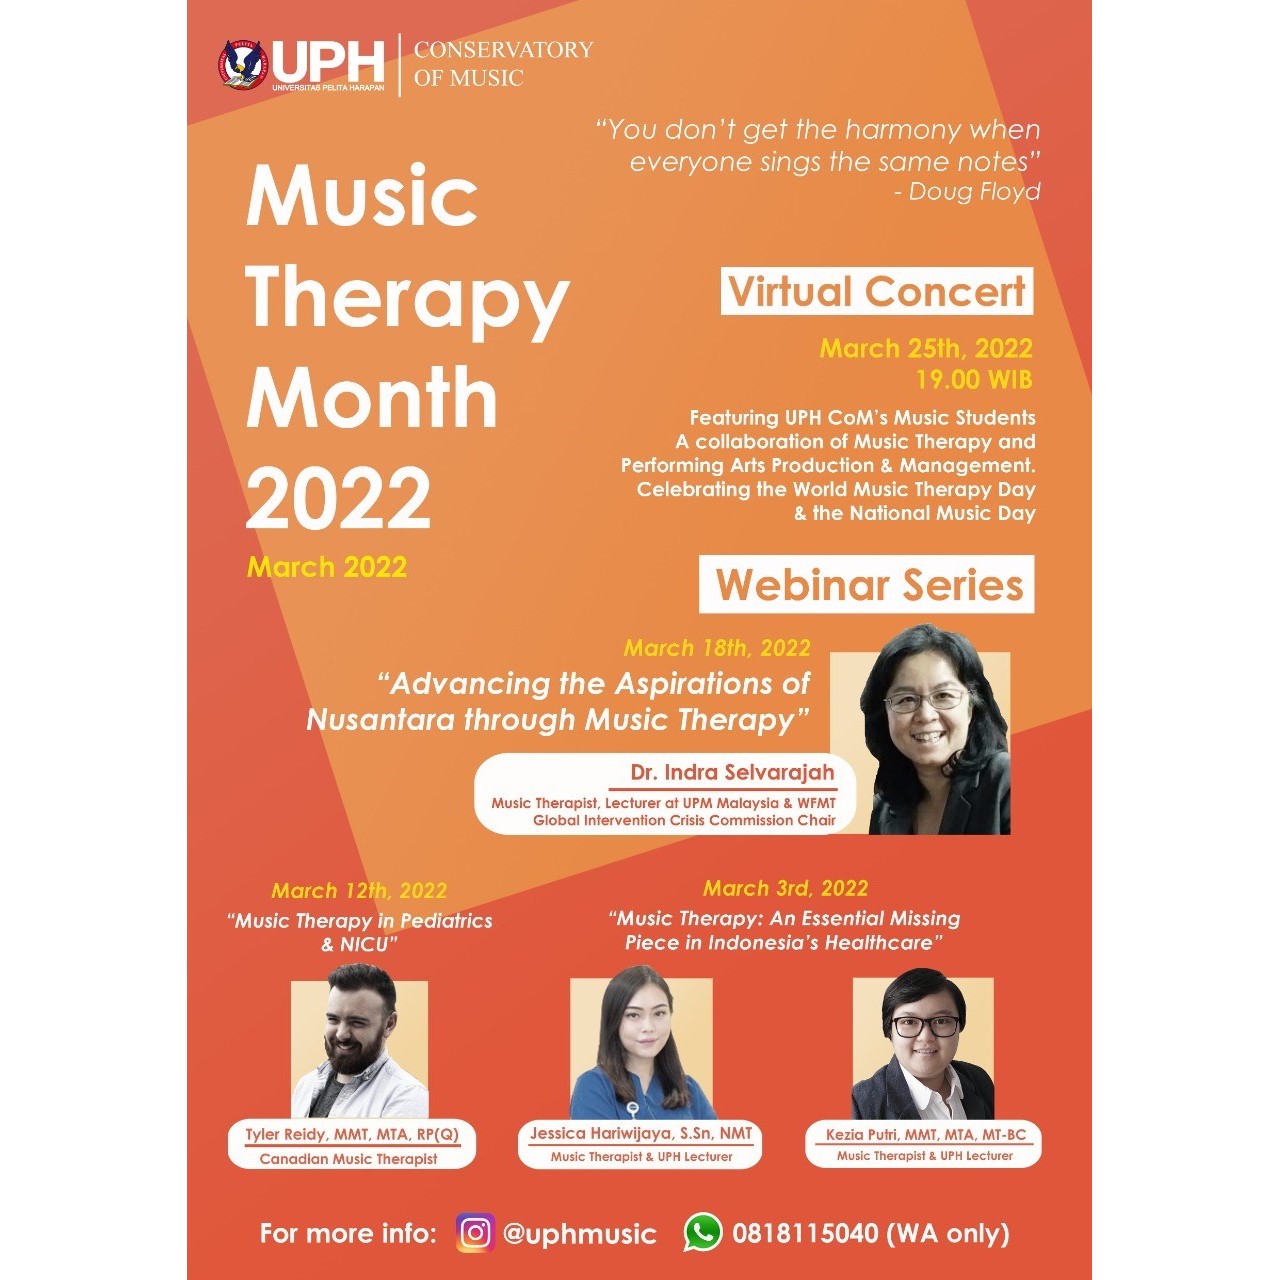 Music Therapy Month 2022